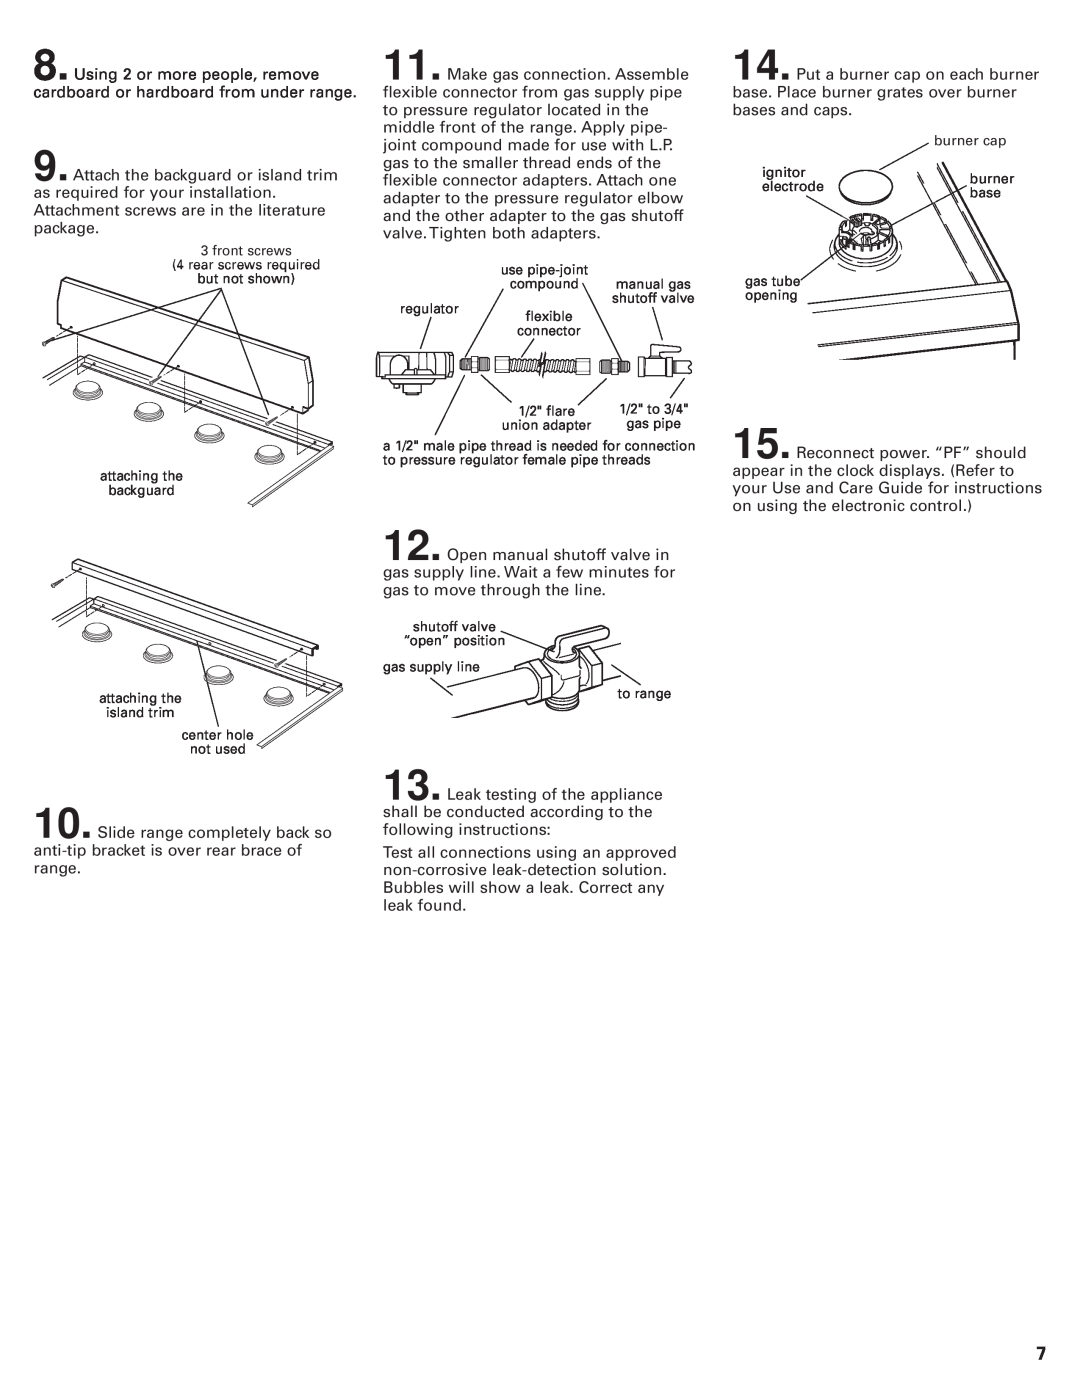 KitchenAid 8302472A installation instructions front screws 4 rear screws required 